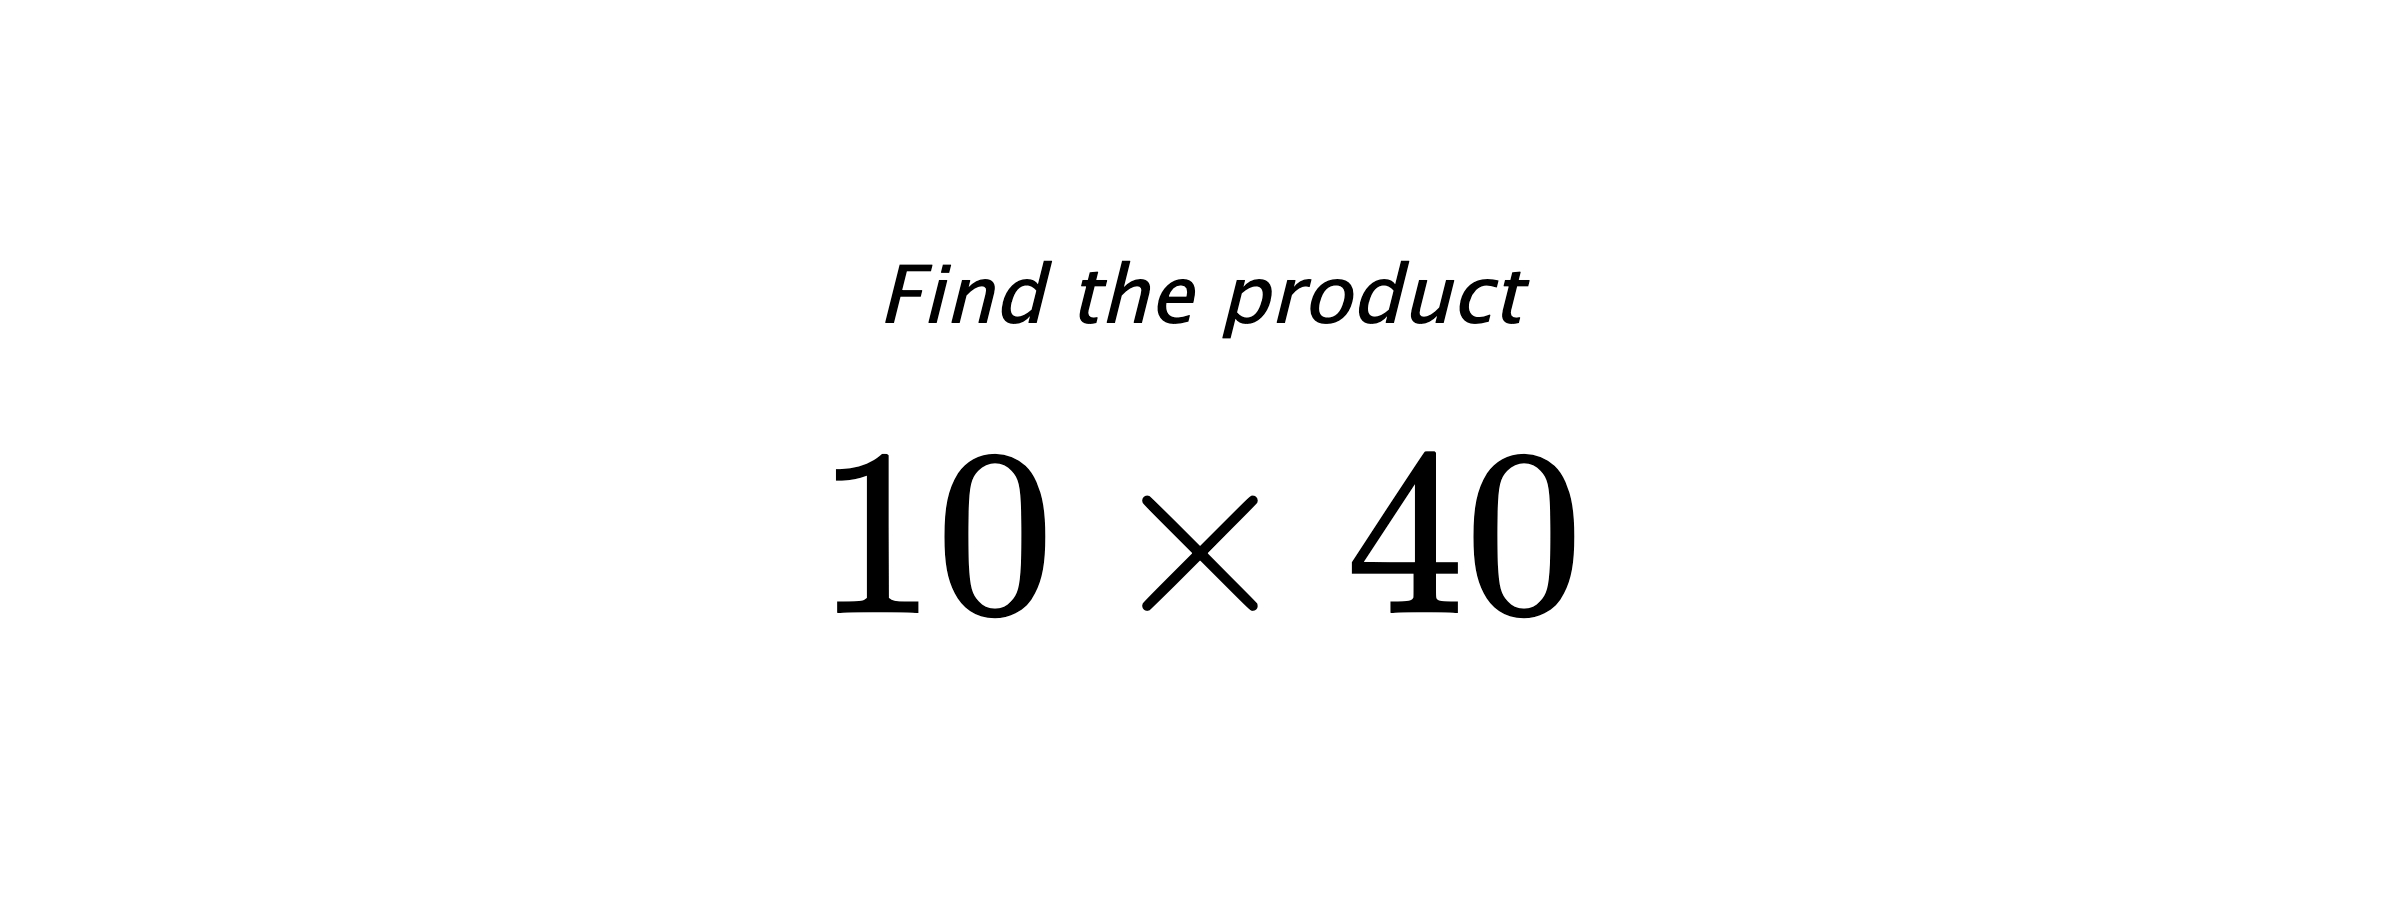 Find the product $ 10 \times 40 $